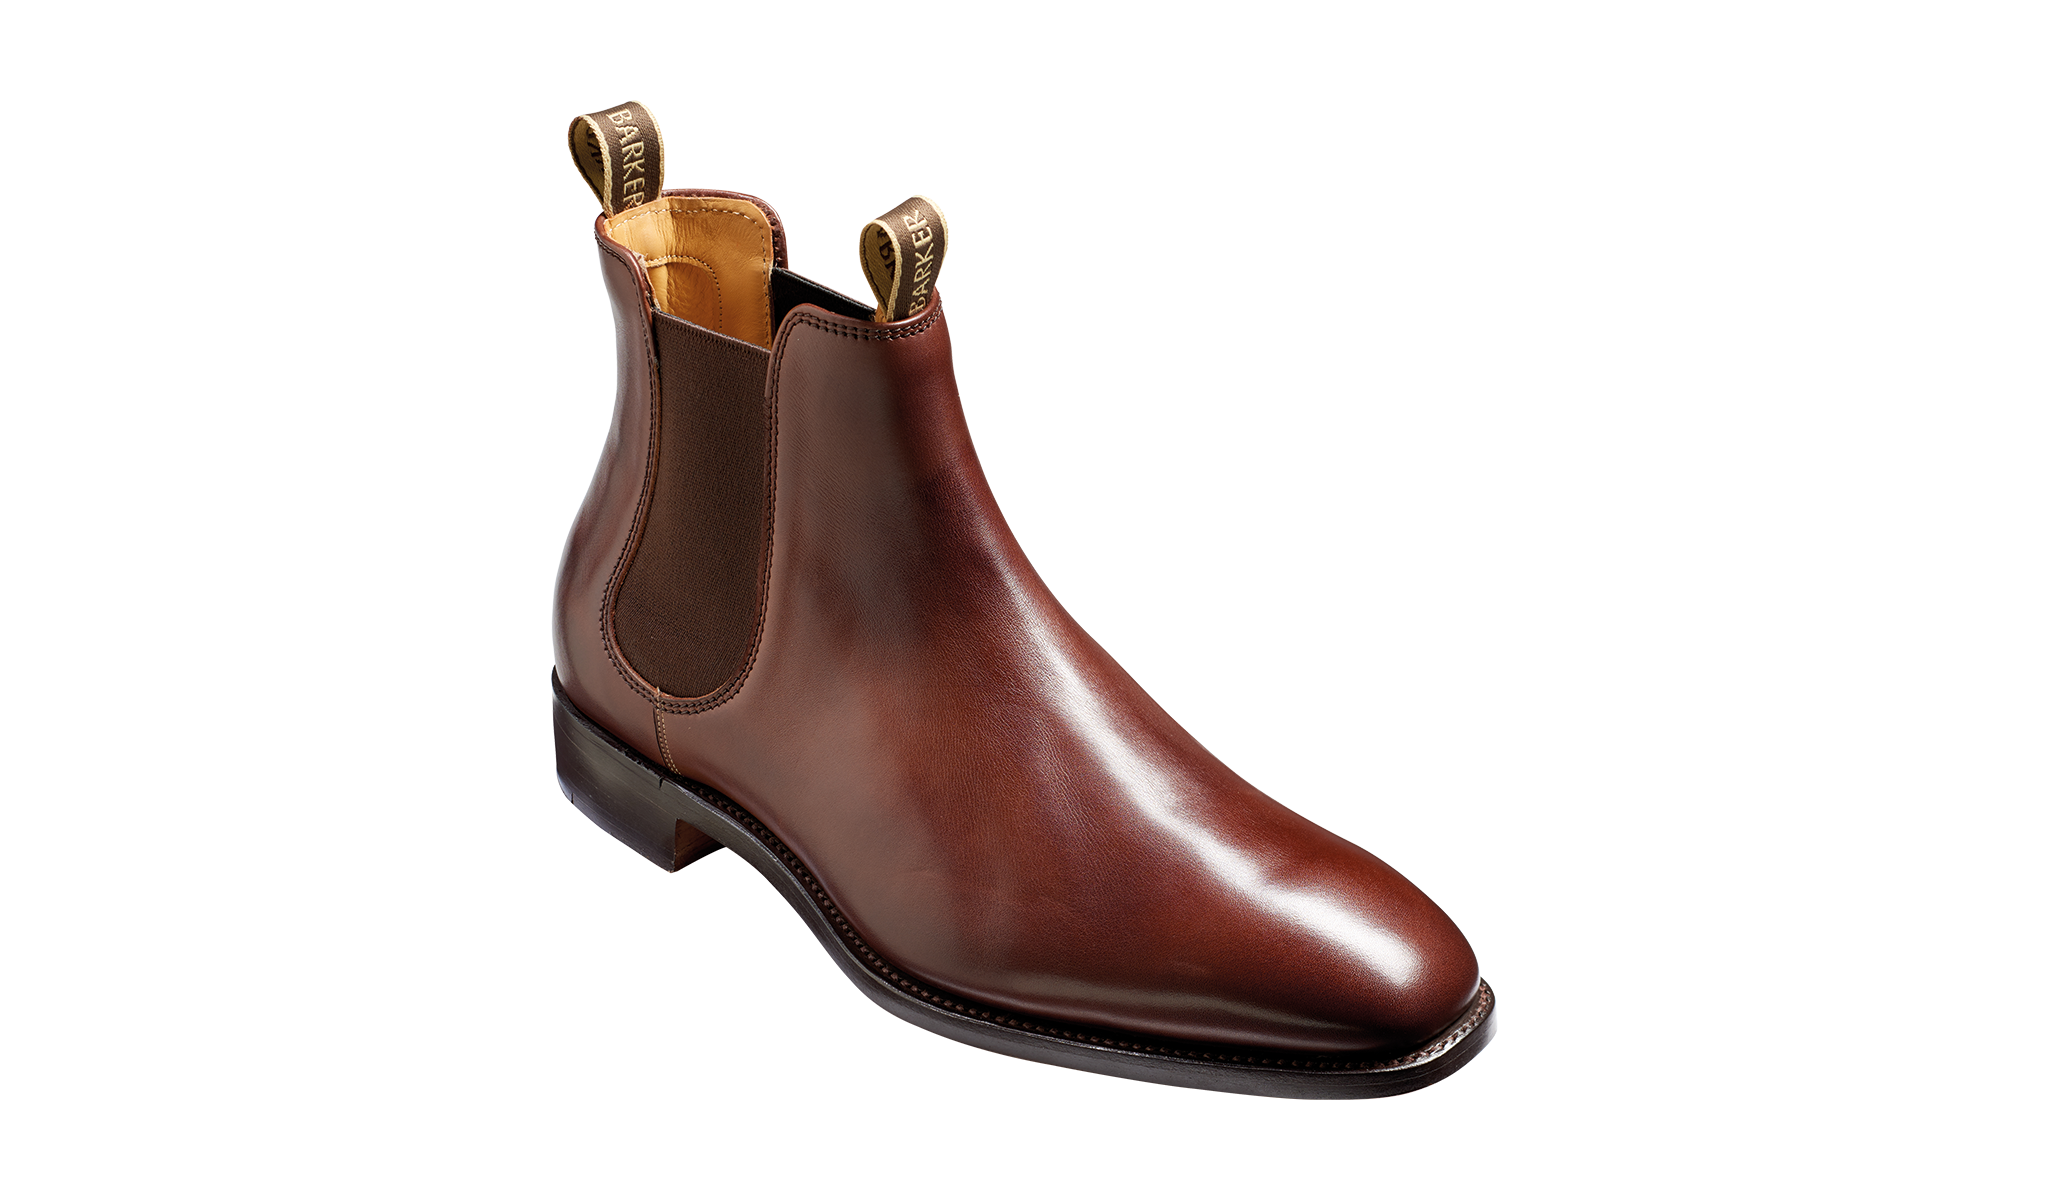 Mansfield - Men's Handmade Brown Leather Chelsea Boot From Barker